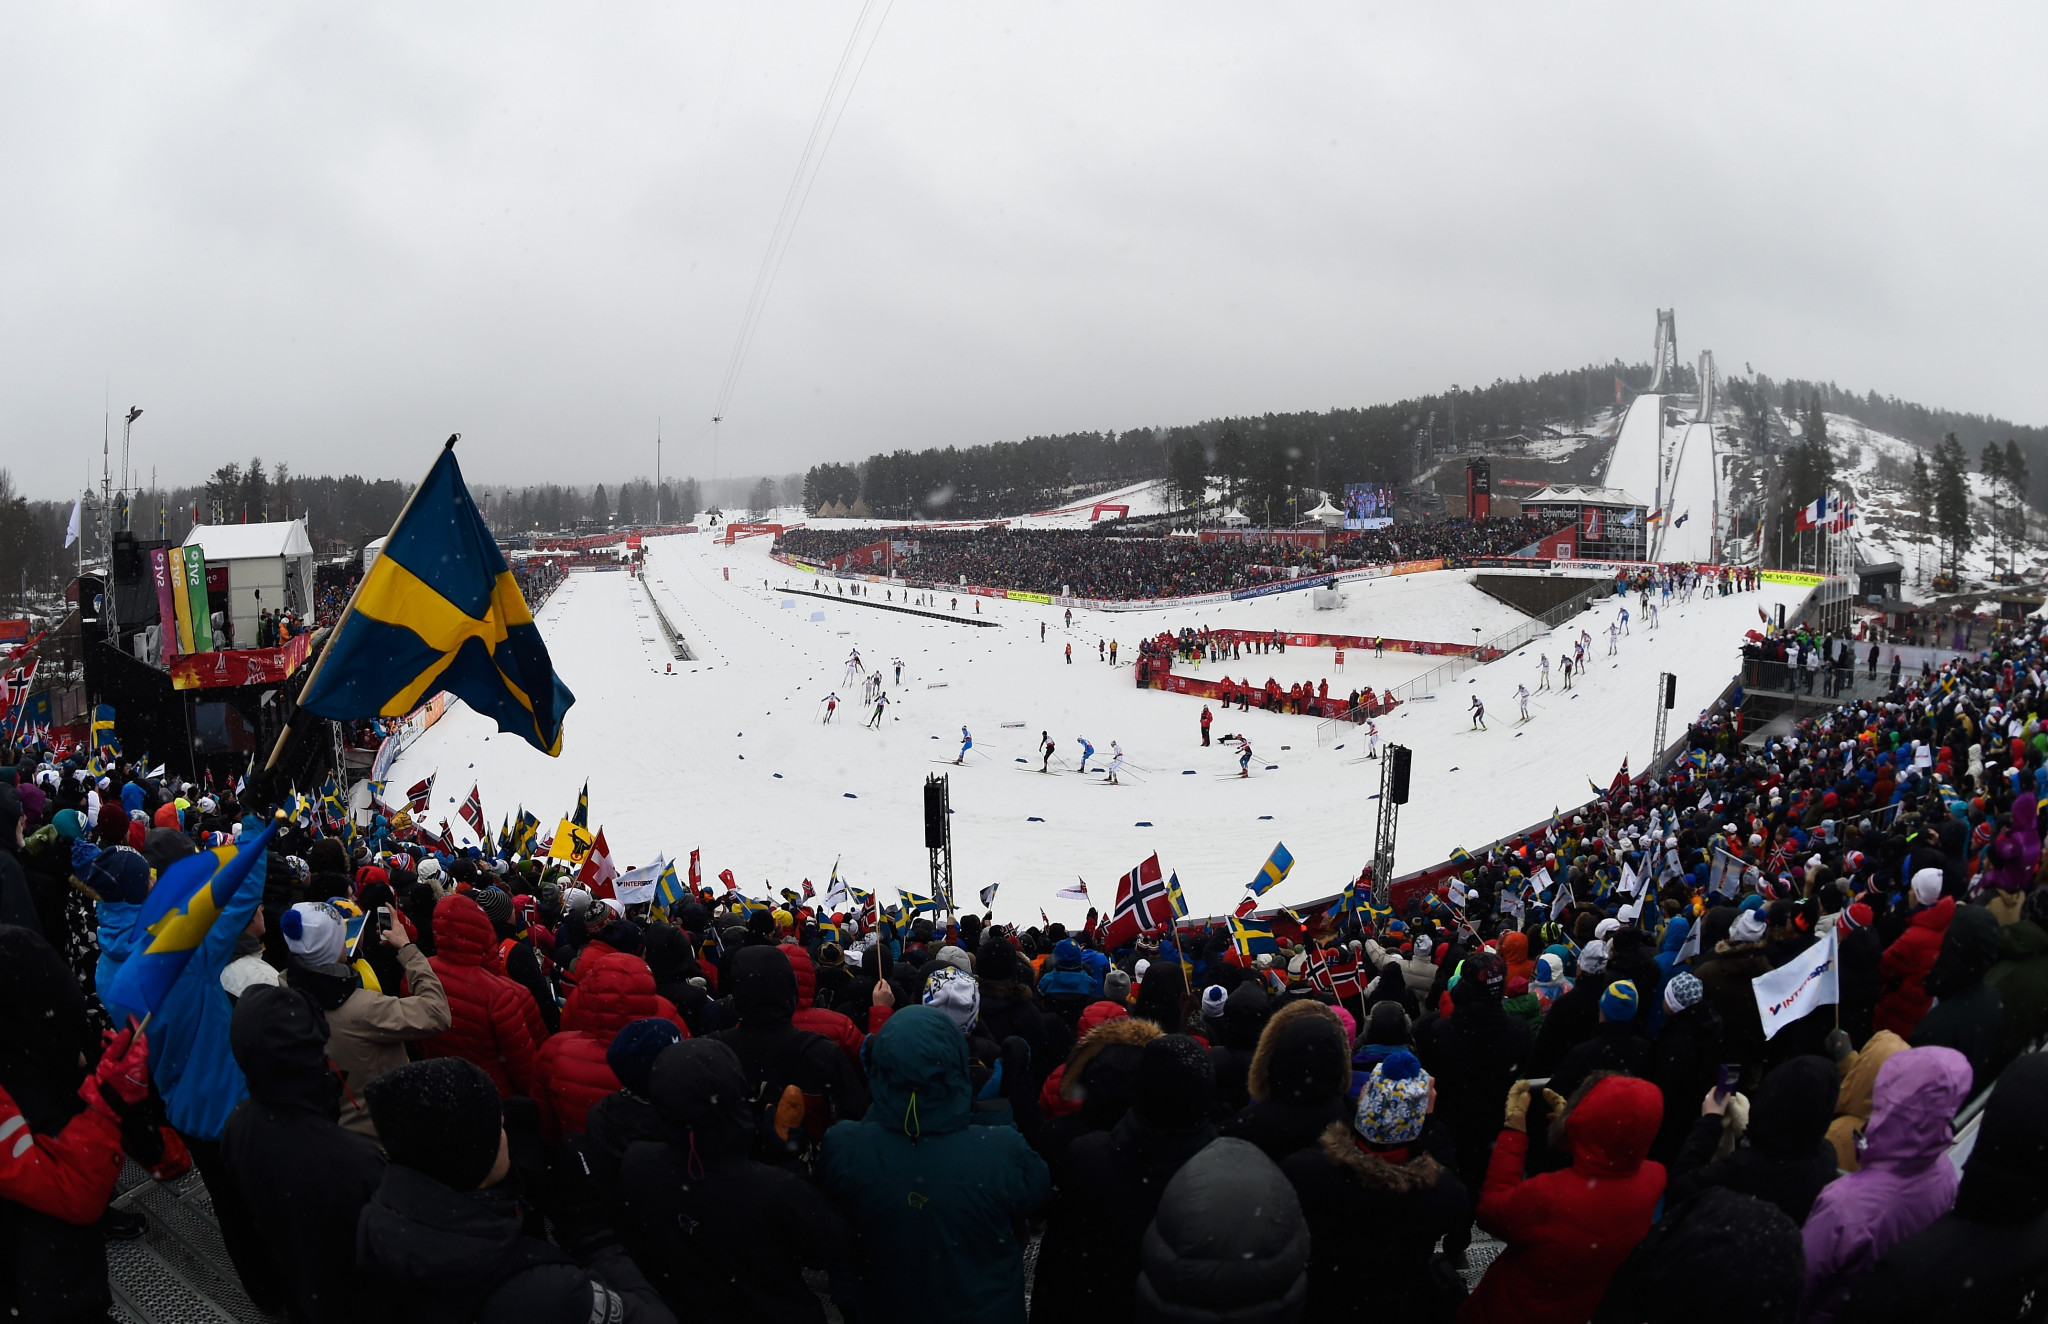 Sweden is actively pursuing to bid for the 2030 Winter Olympics and Paralympics ©Getty Images 